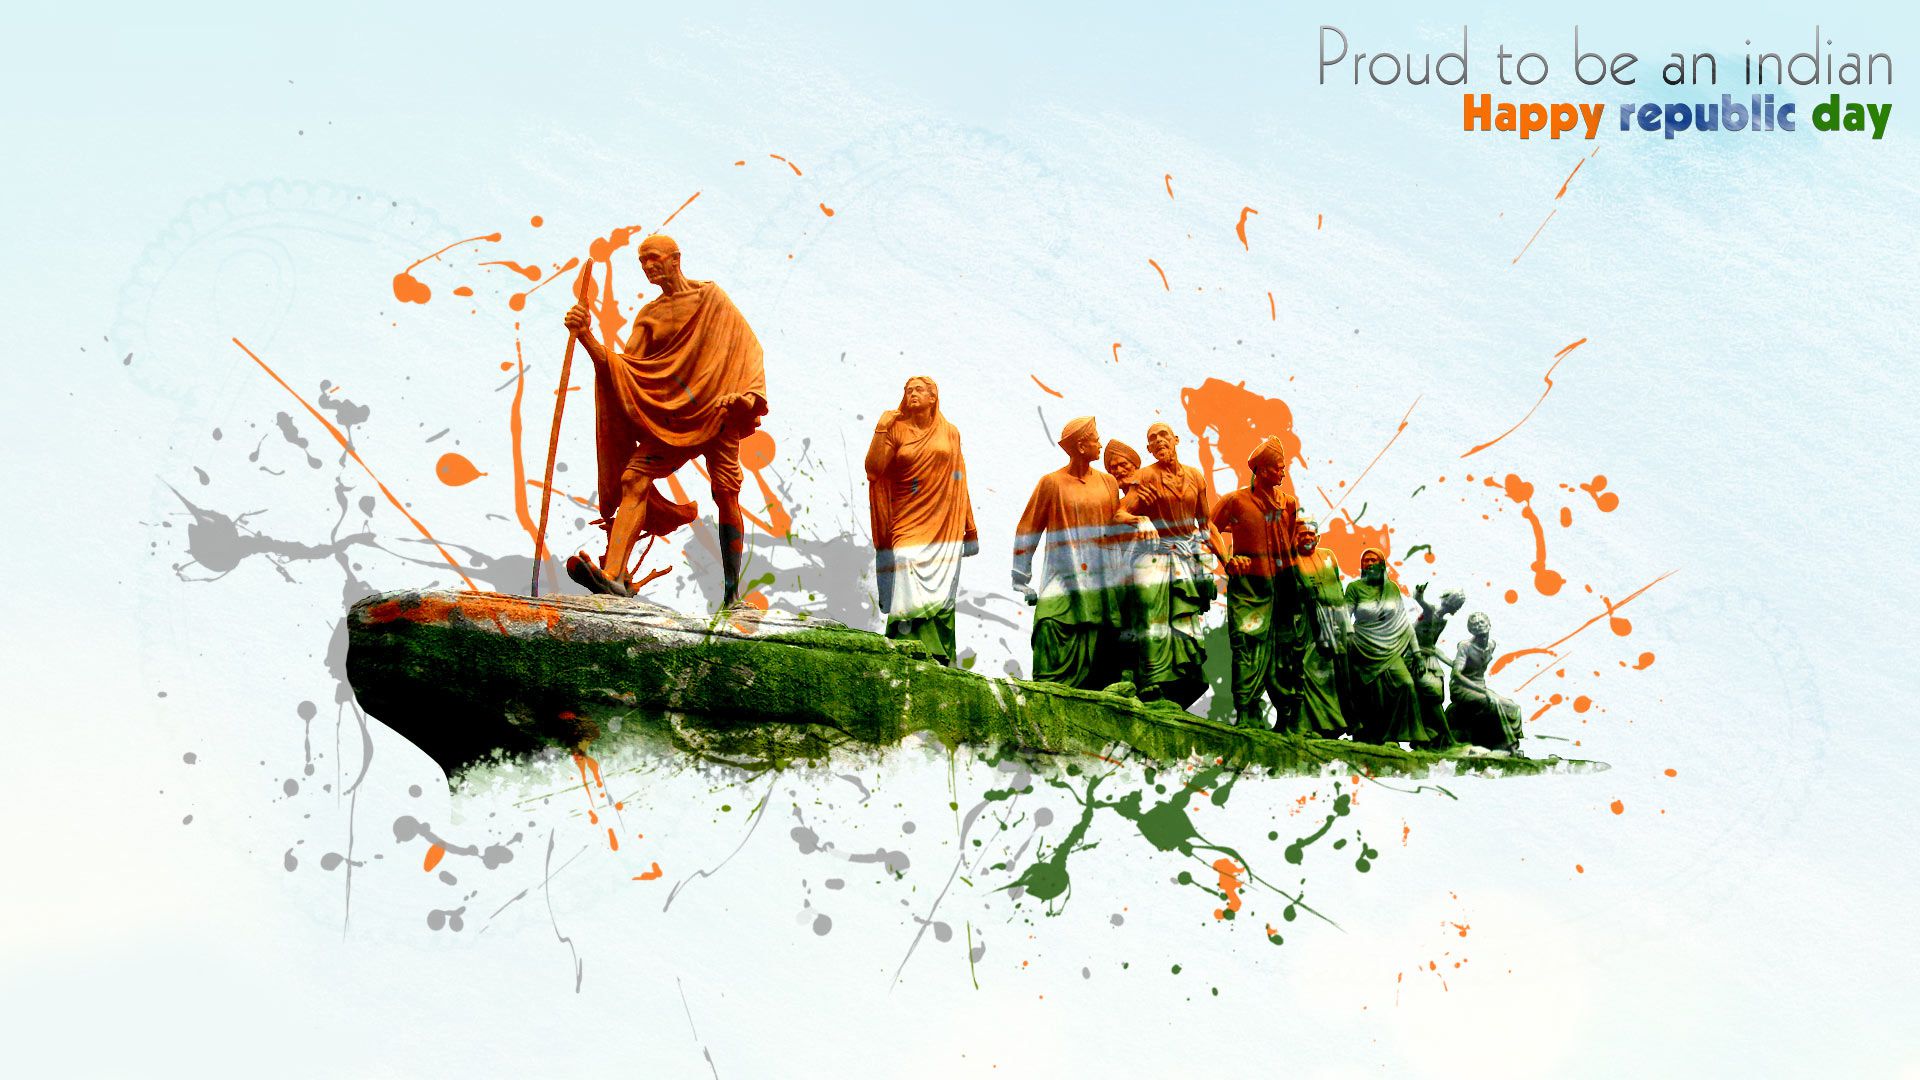 Prateek Maity's Patriotic Poster: Republic Day | Curious Times